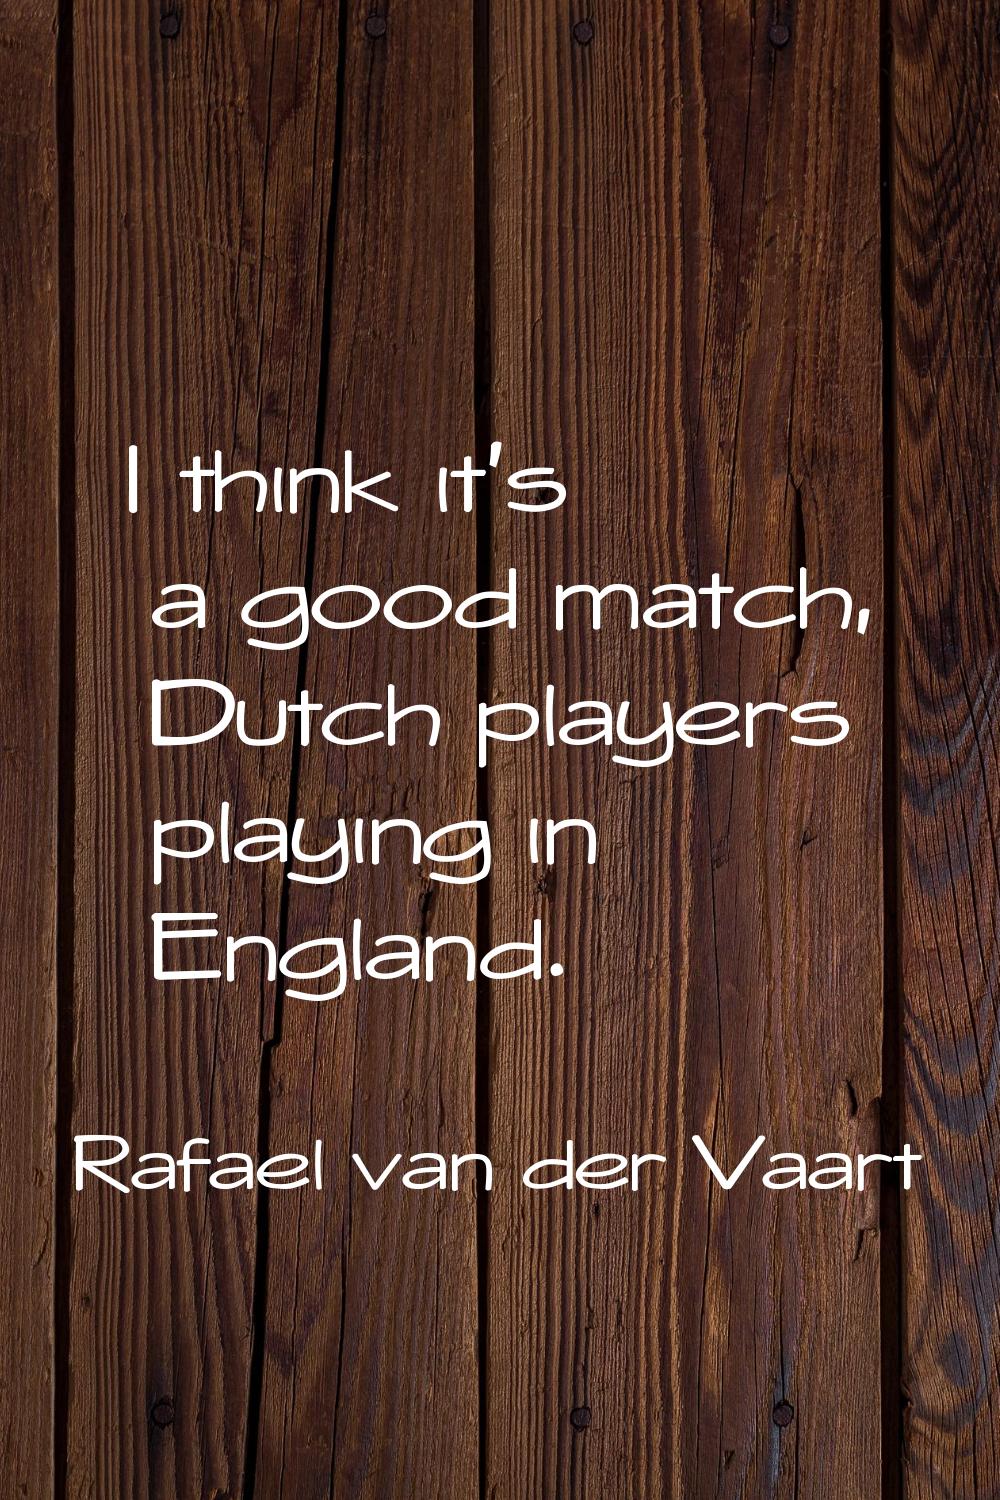 I think it's a good match, Dutch players playing in England.